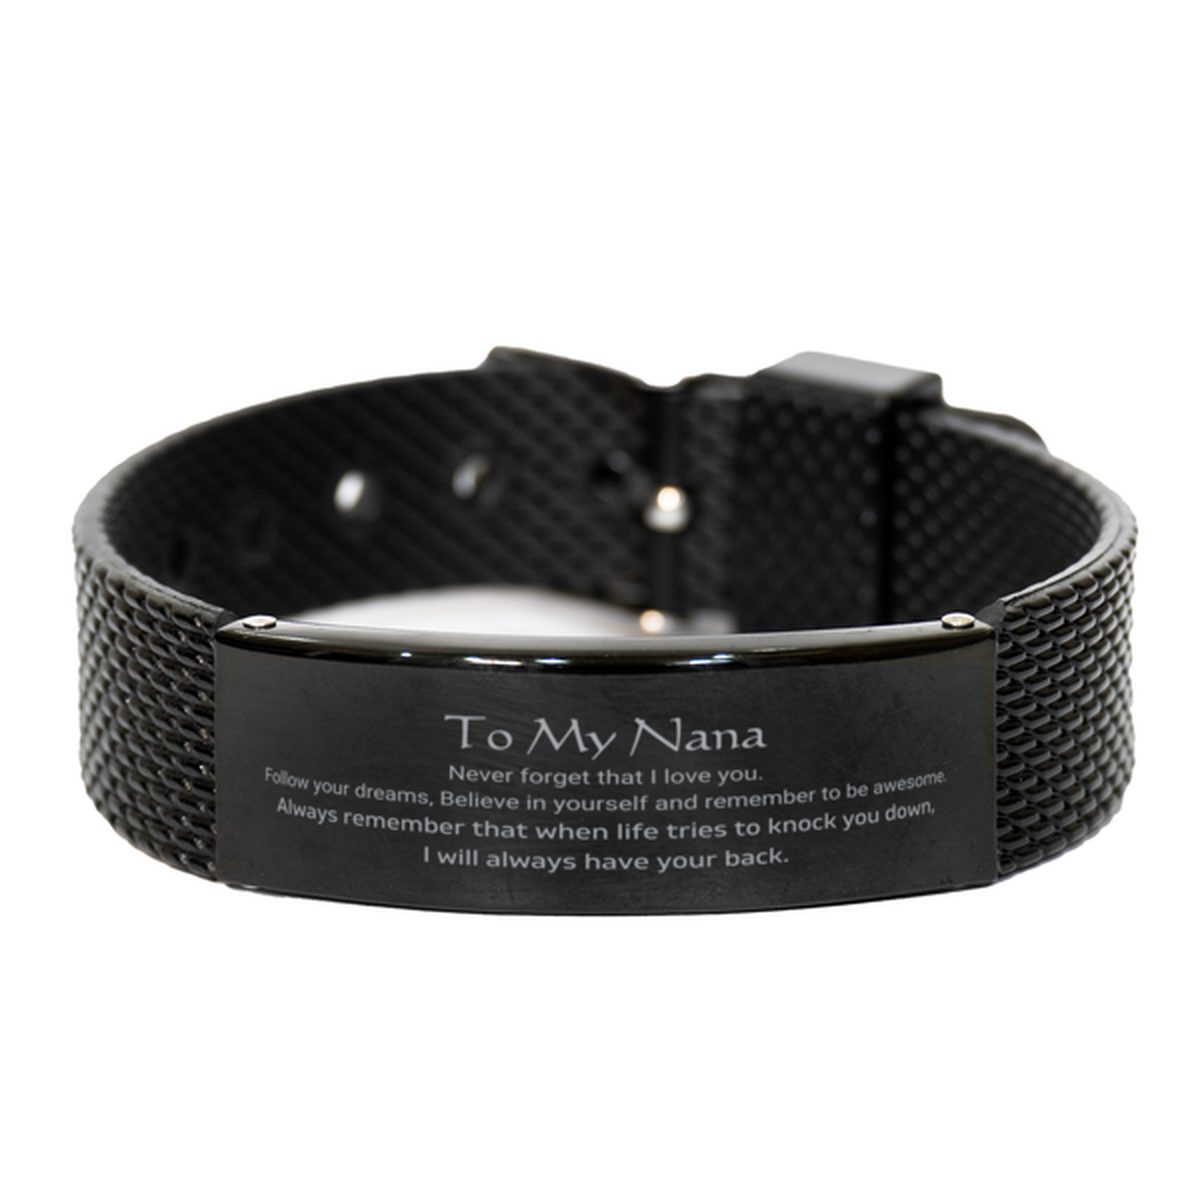 Inspirational Gifts for Nana, Follow your dreams, Believe in yourself, Nana Black Shark Mesh Bracelet, Birthday Christmas Unique Gifts For Nana